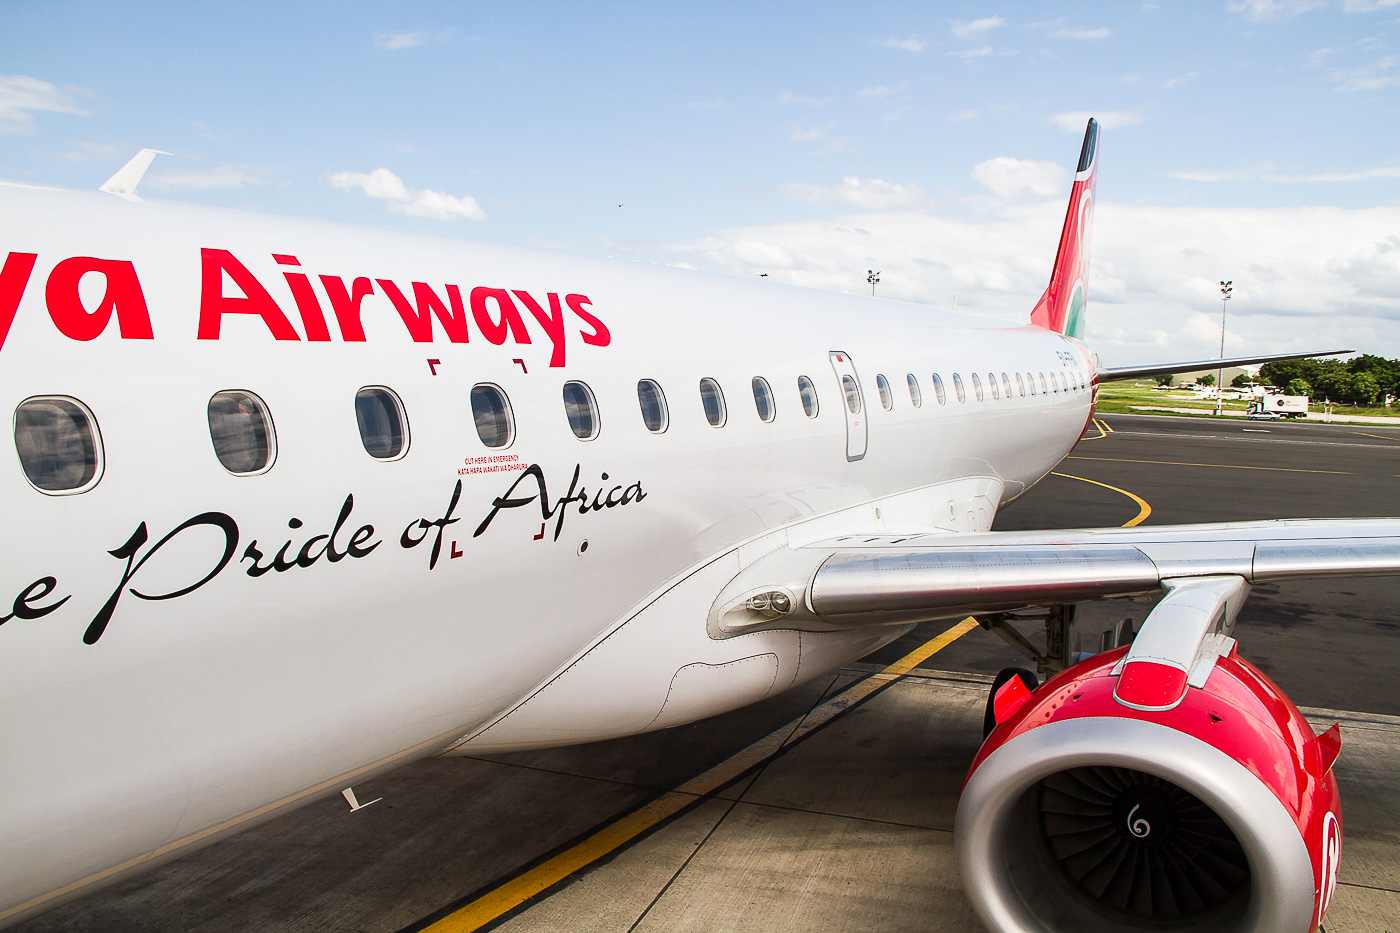 Kenya airways to return leased aircraft - Business Today